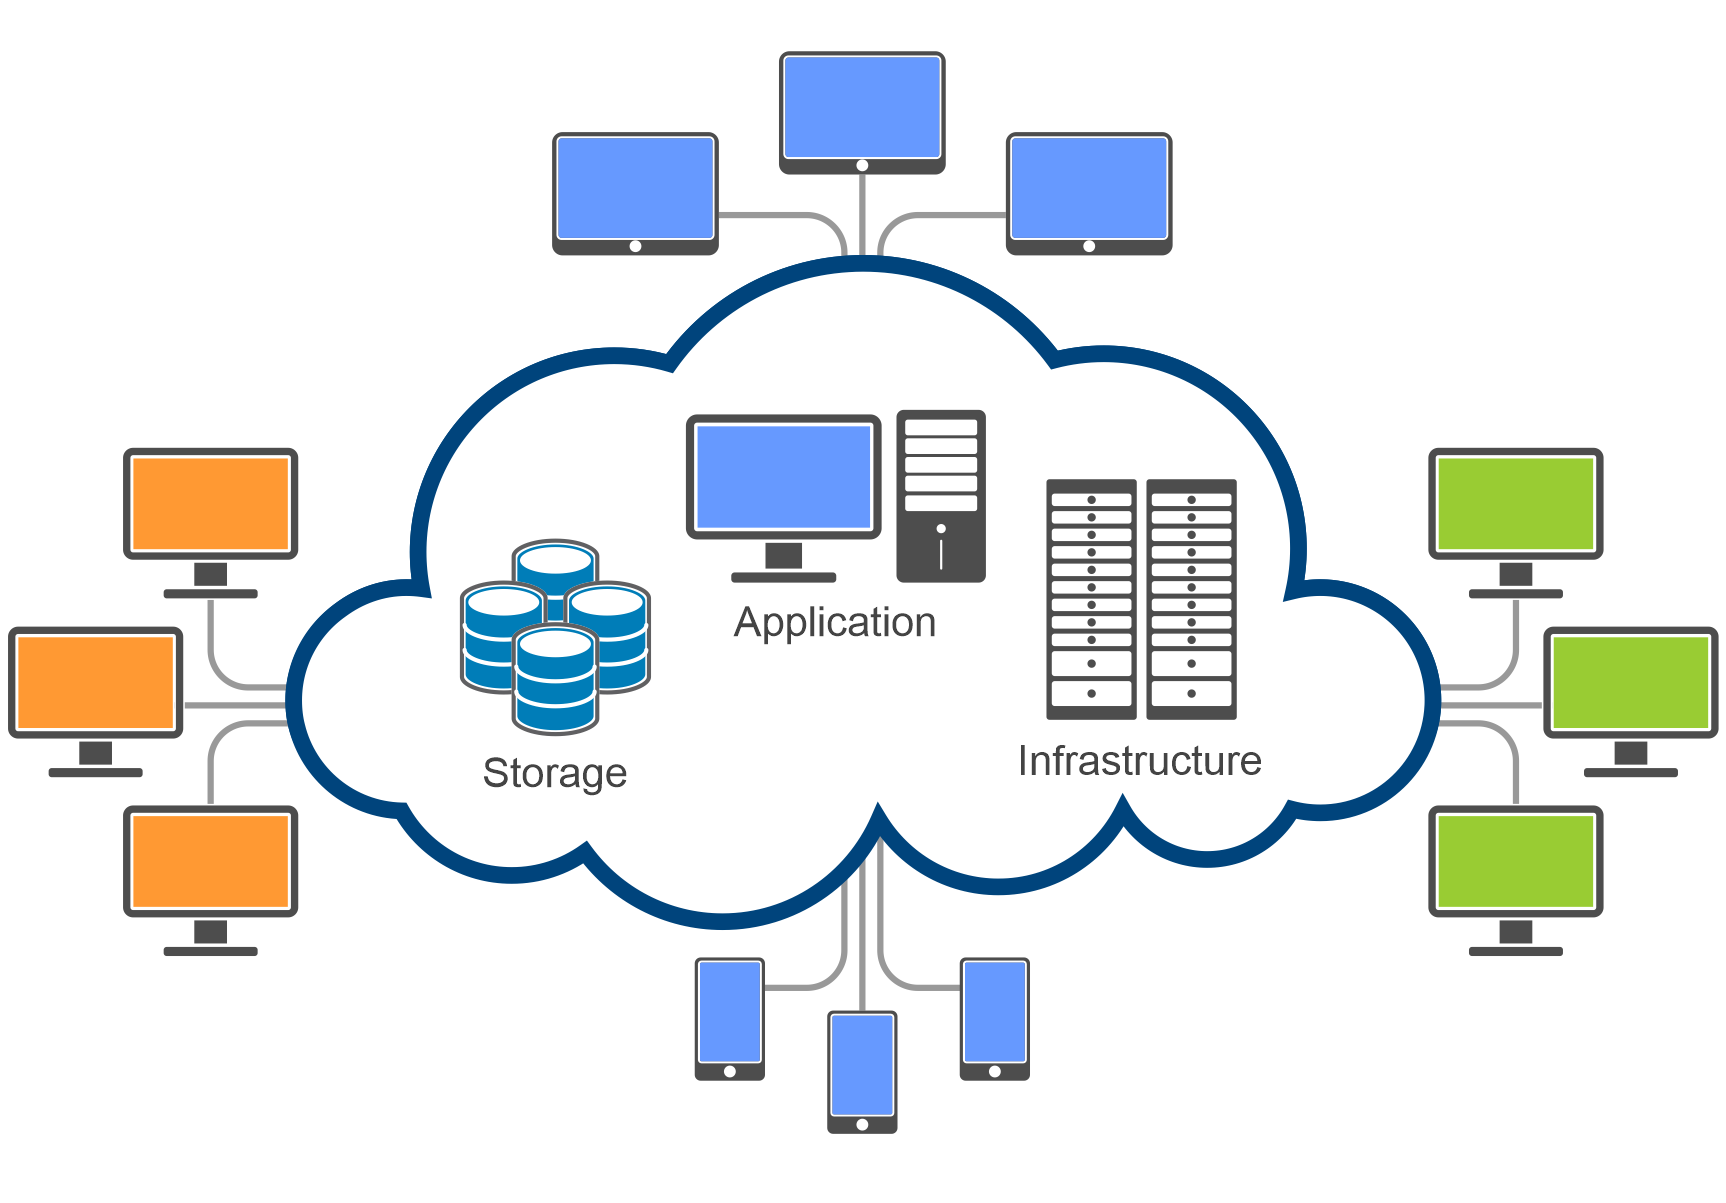 A illustration of users and devices connecting to storage, applications and infrastructure in the cloud